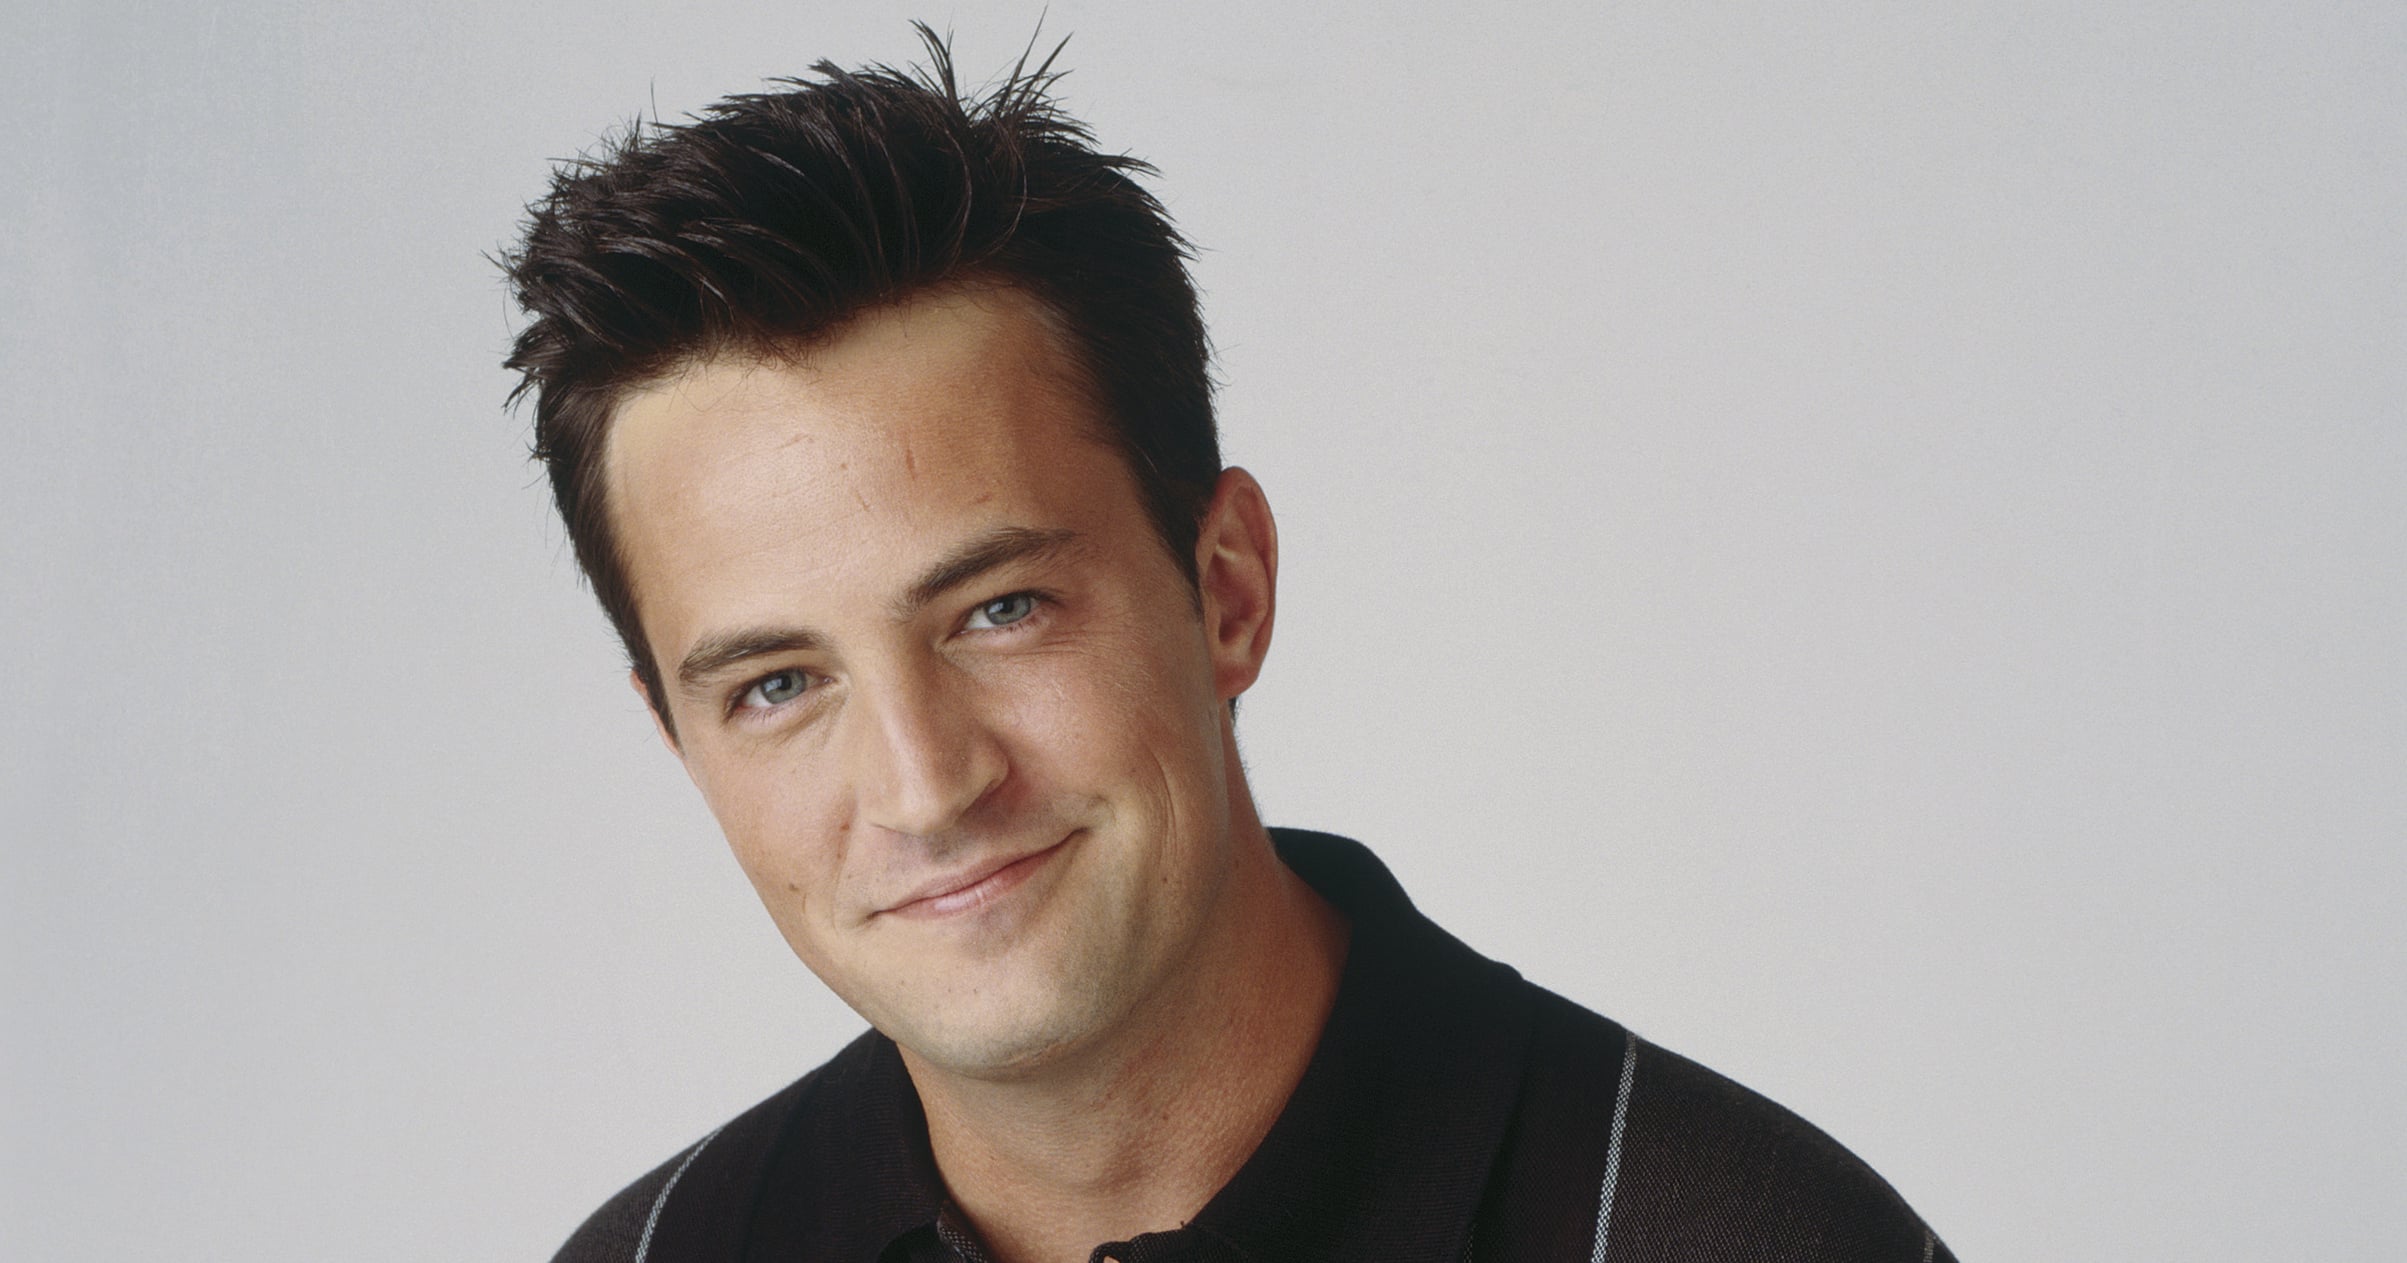 the-“friends”-cast-and-other-stars-react-to-matthew-perry’s-death:-“the-world-will-miss-you”